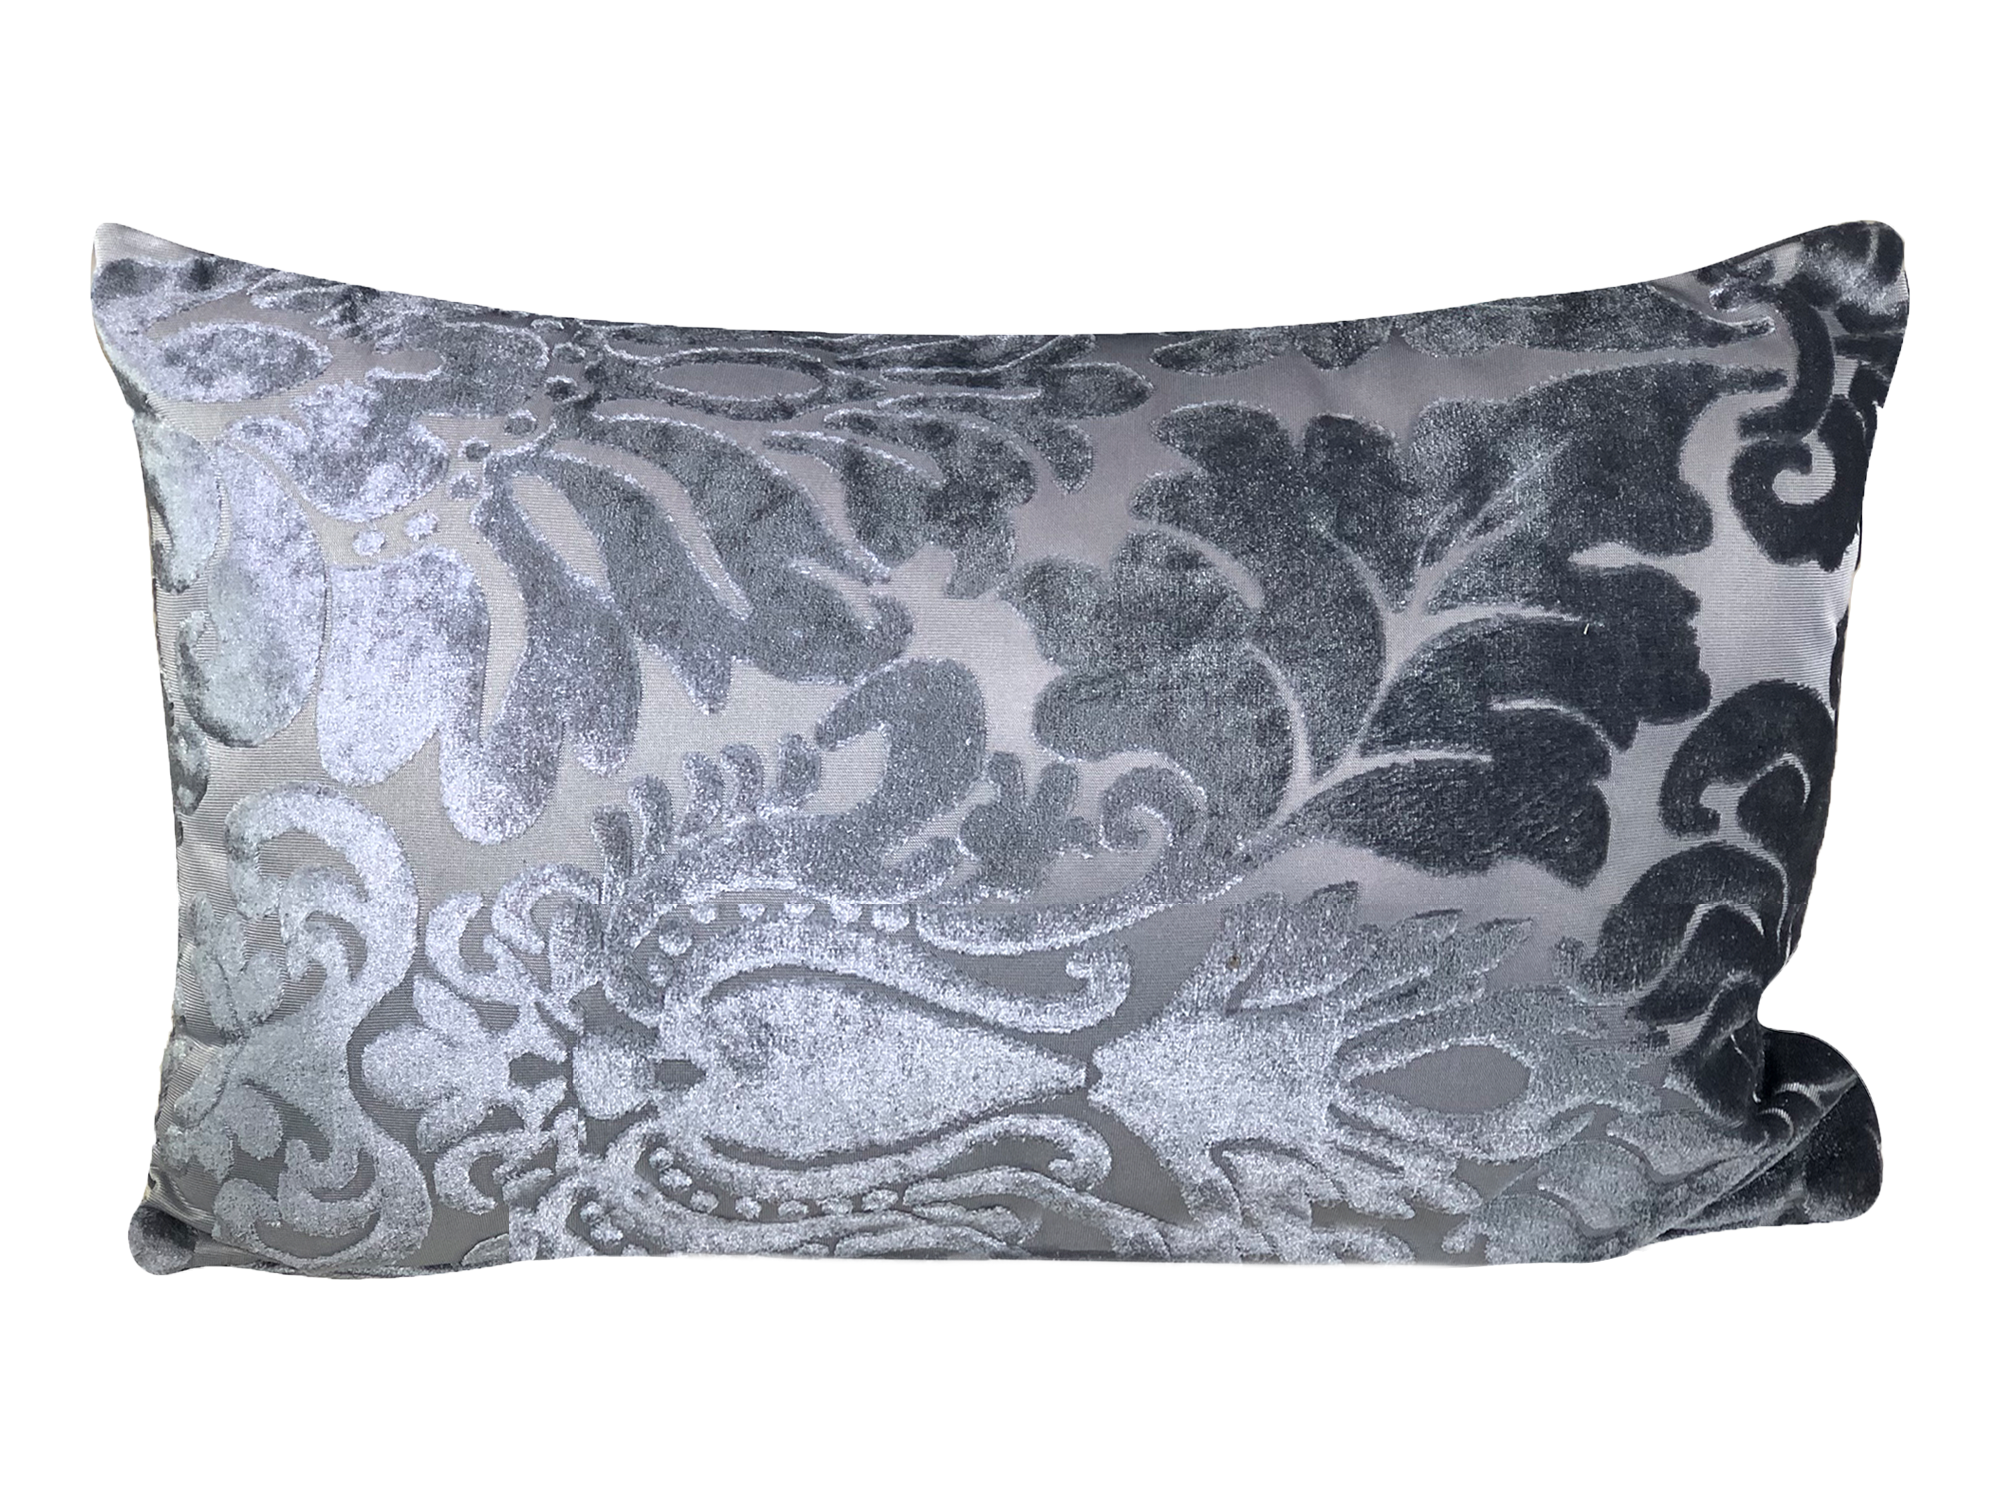 TEXTURED EMBOSSED PILLOW - GREY ON GREY